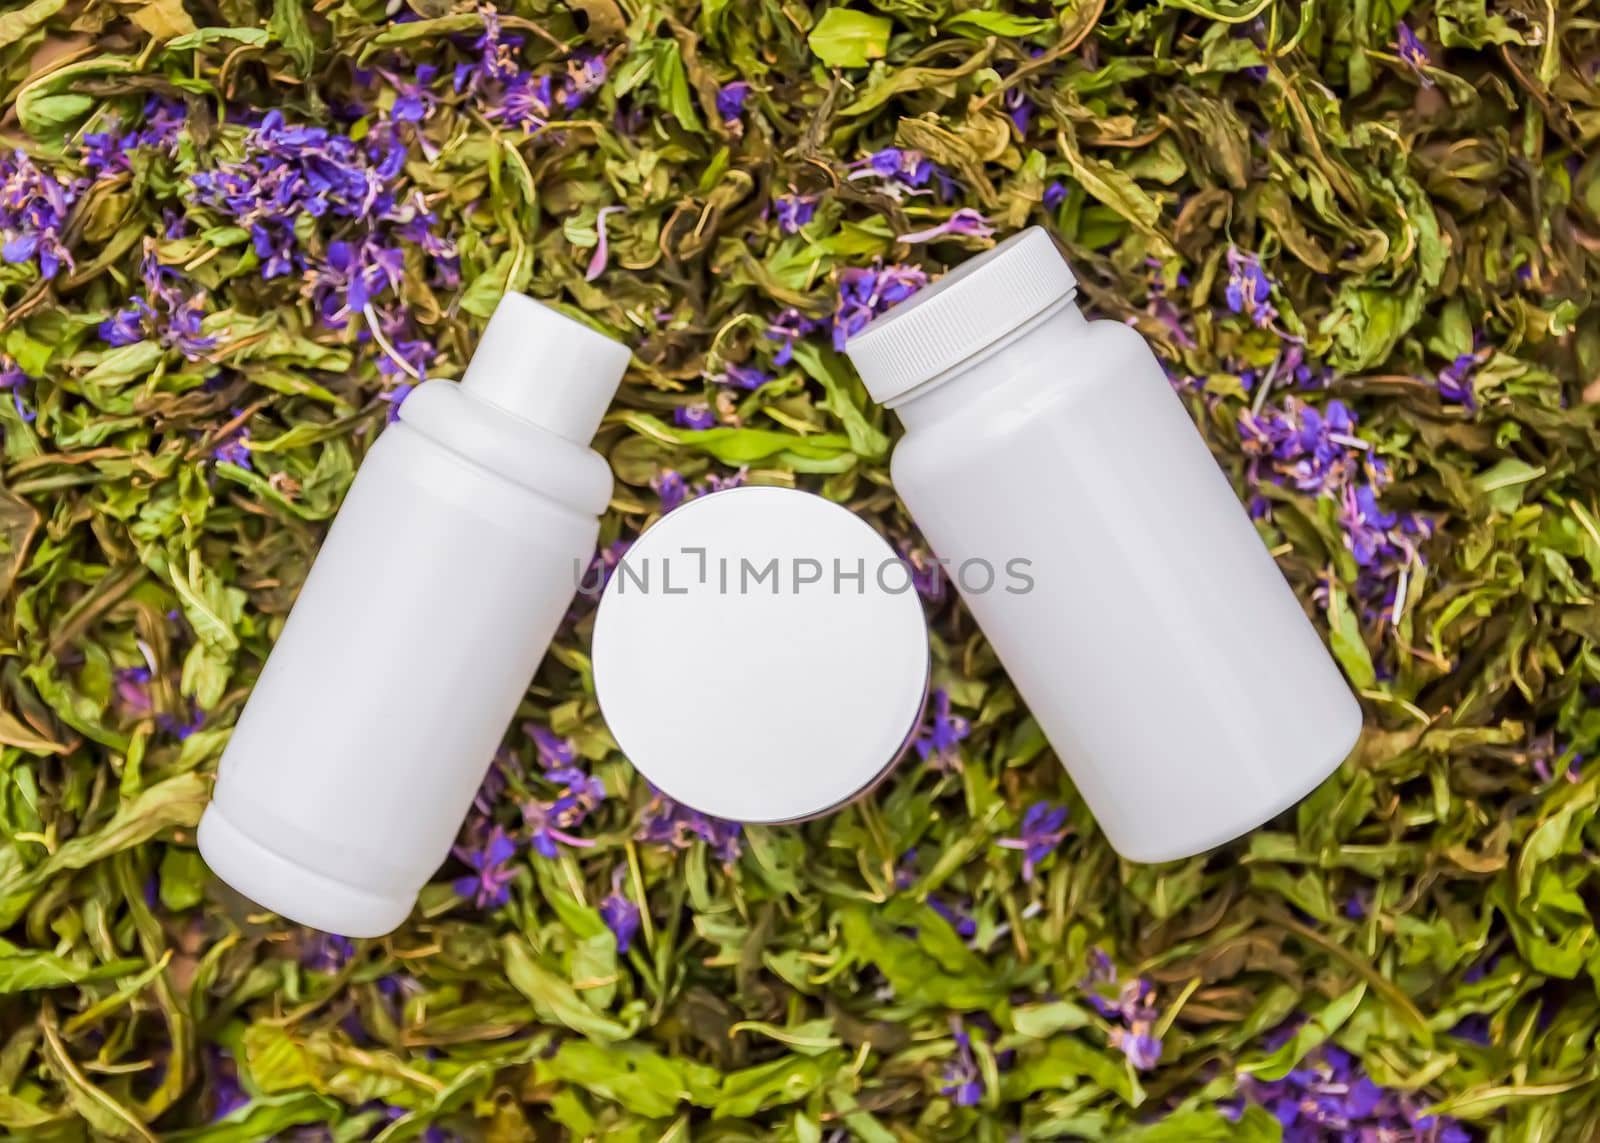 White plastic containers on dried flowers of the Blooming sally, Epilobium angustifolium plant, Fireweed or Rosebay Willowherb. by nightlyviolet